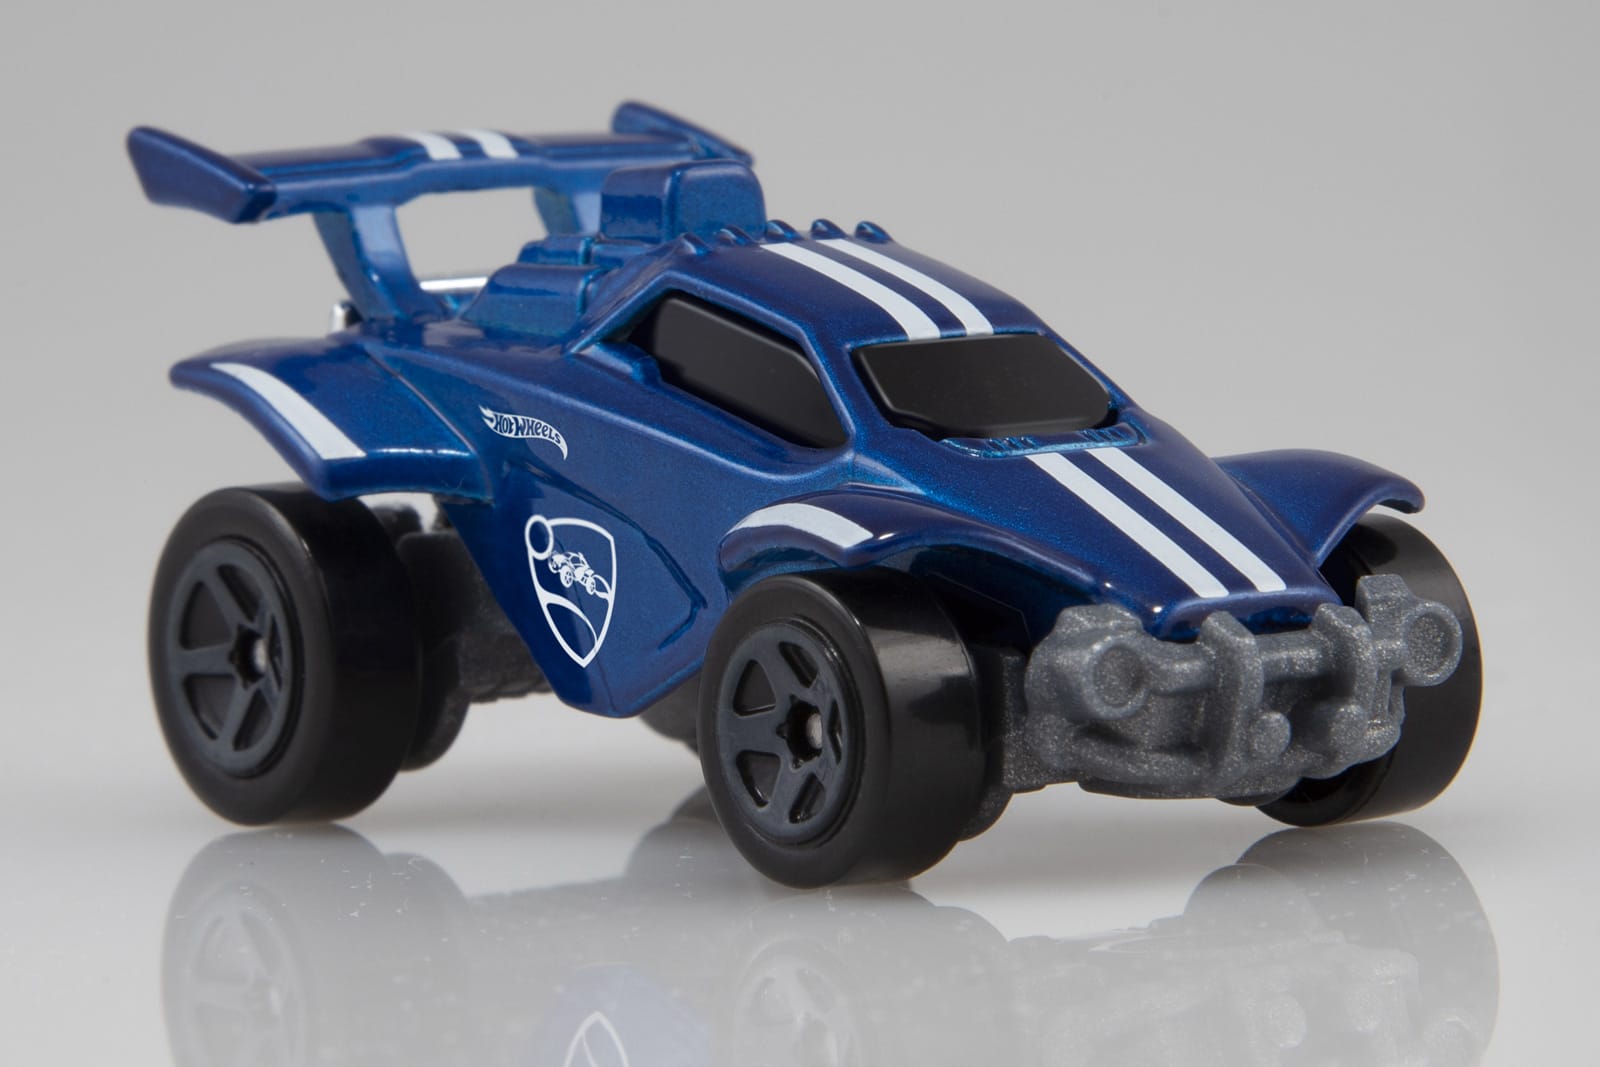 The first 'Rocket League' Hot Wheels car arrives this month.